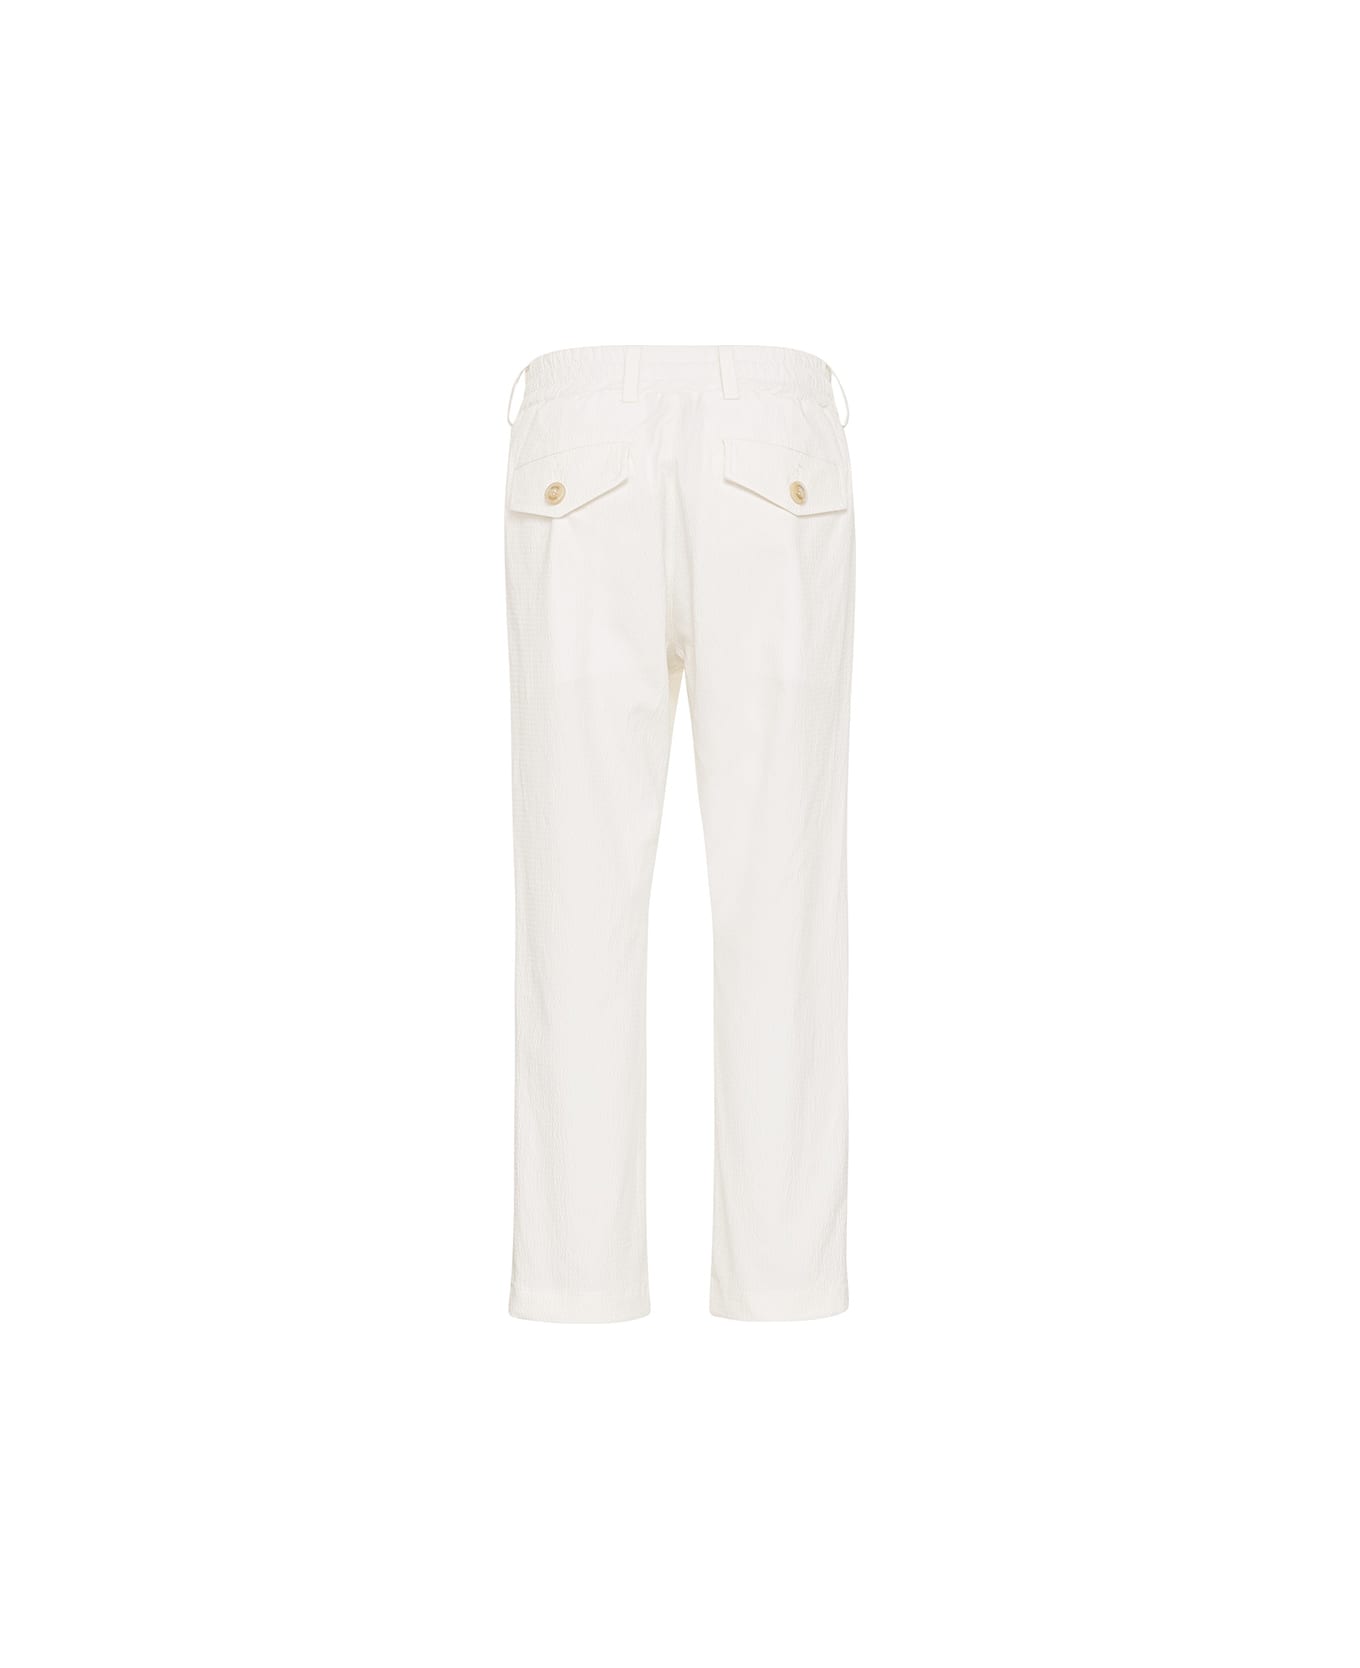 Eleventy White Joggers Pants With Contrasting Drawstring - White